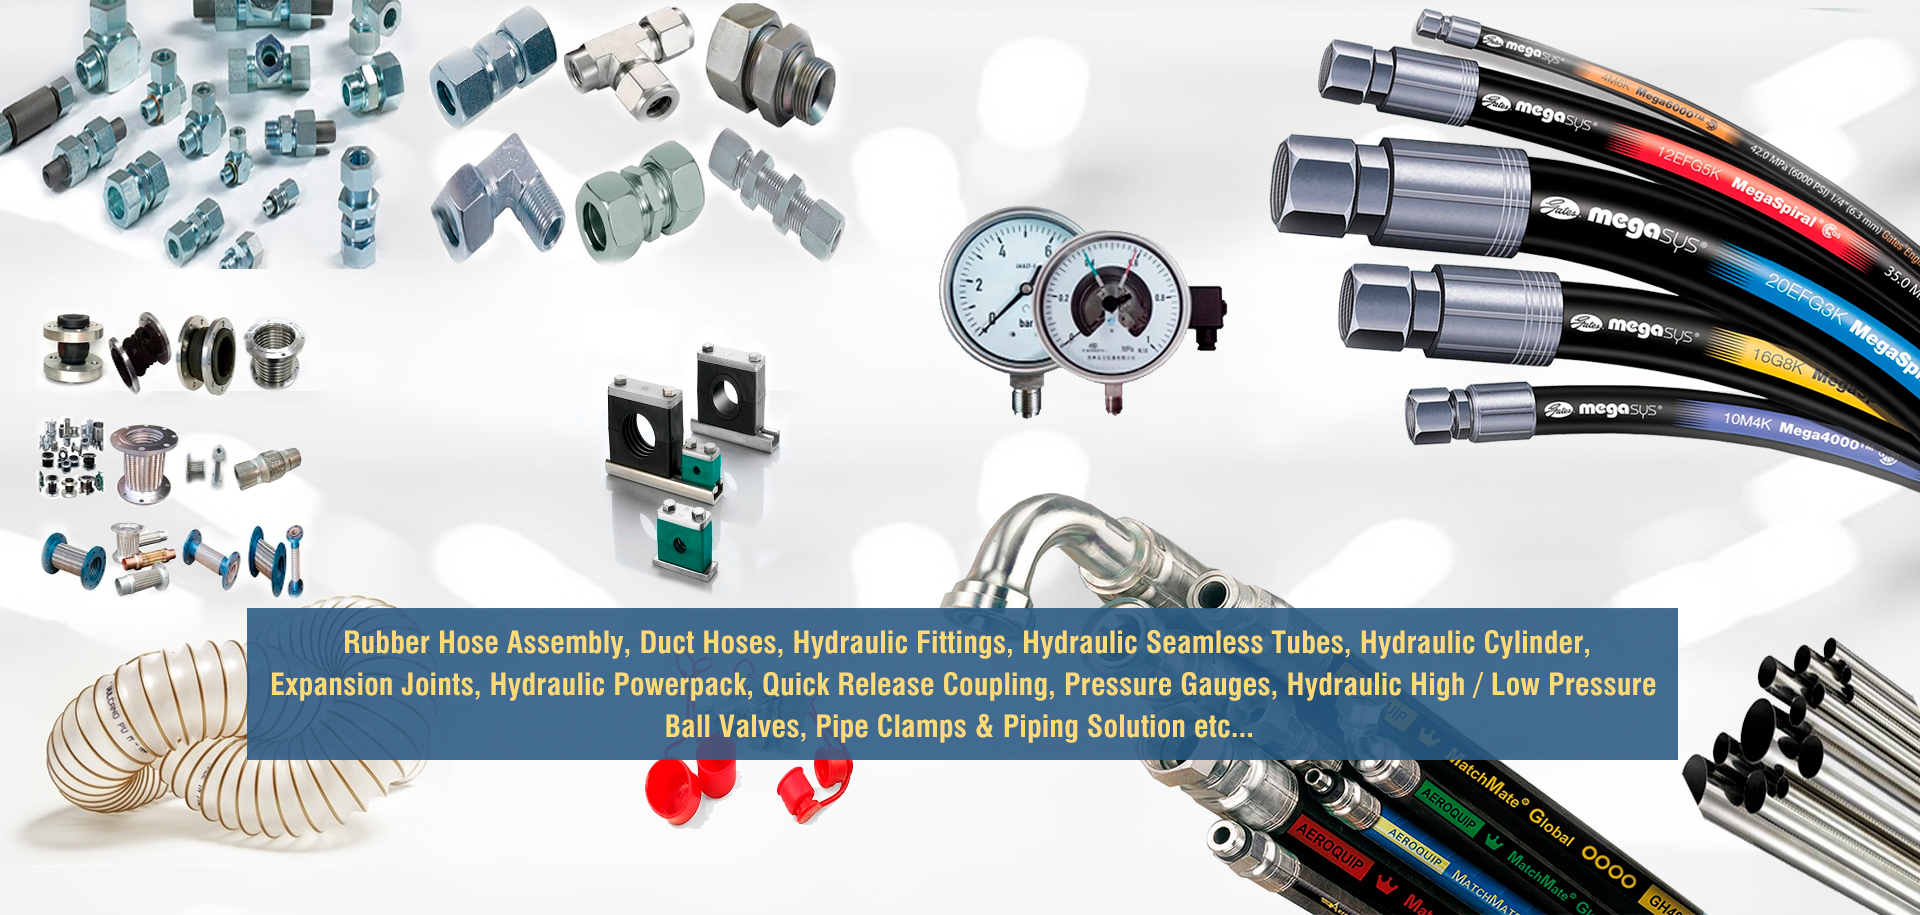 Manufacturer, Supplier Of Hydraulic Hose Assembly, Parker / Gates Hoses, Hydraulic Ferrule Fittings, Seamless Tubes, Rubber Expansion Joints, SS Corrugated Flexible Hoses, suction & Delivery Hoses, Hydraulic Powerpacks, Hydraulic Cylinders, PU Duct Hoses/Silicone Hoses/Thunder Hoses, Services / Erection & Commissioning, ERW Pipeline, Offline Oil Filtration